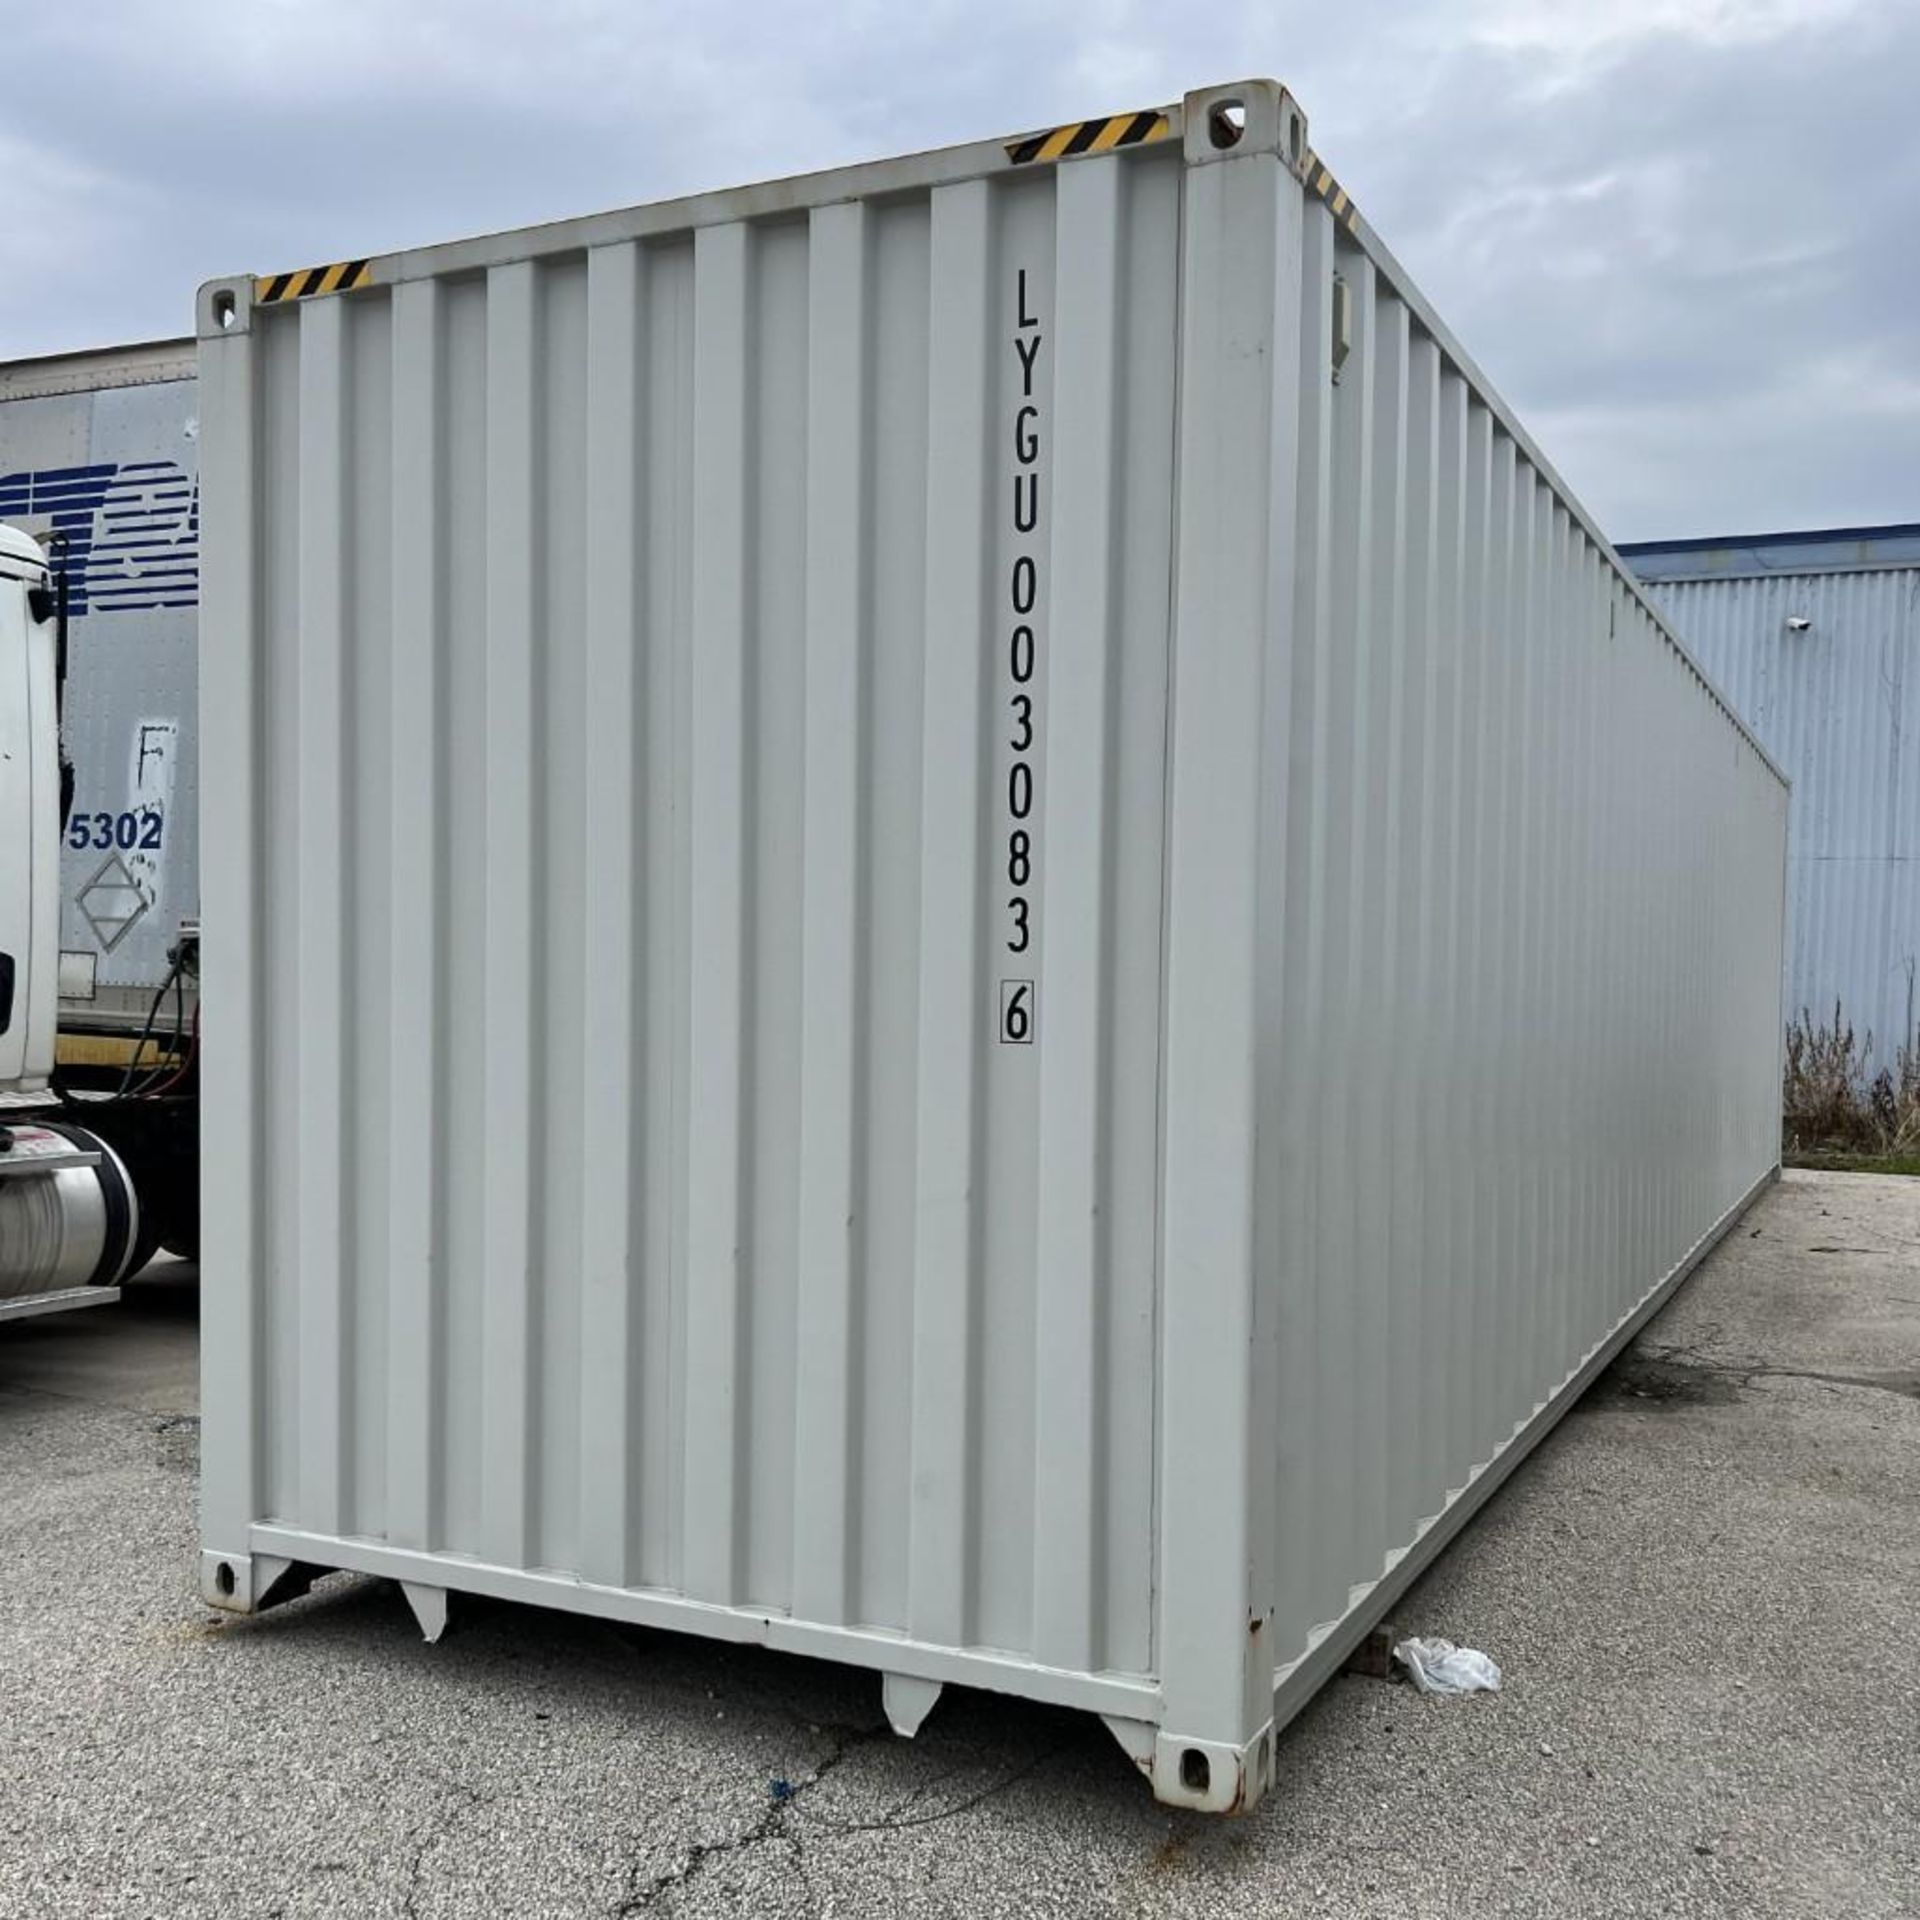 Suihe Type M45G3QC 40' High Cube Open-Sided Storage Container. Serial# DFOC003543, Built 06/2021. - Image 4 of 11